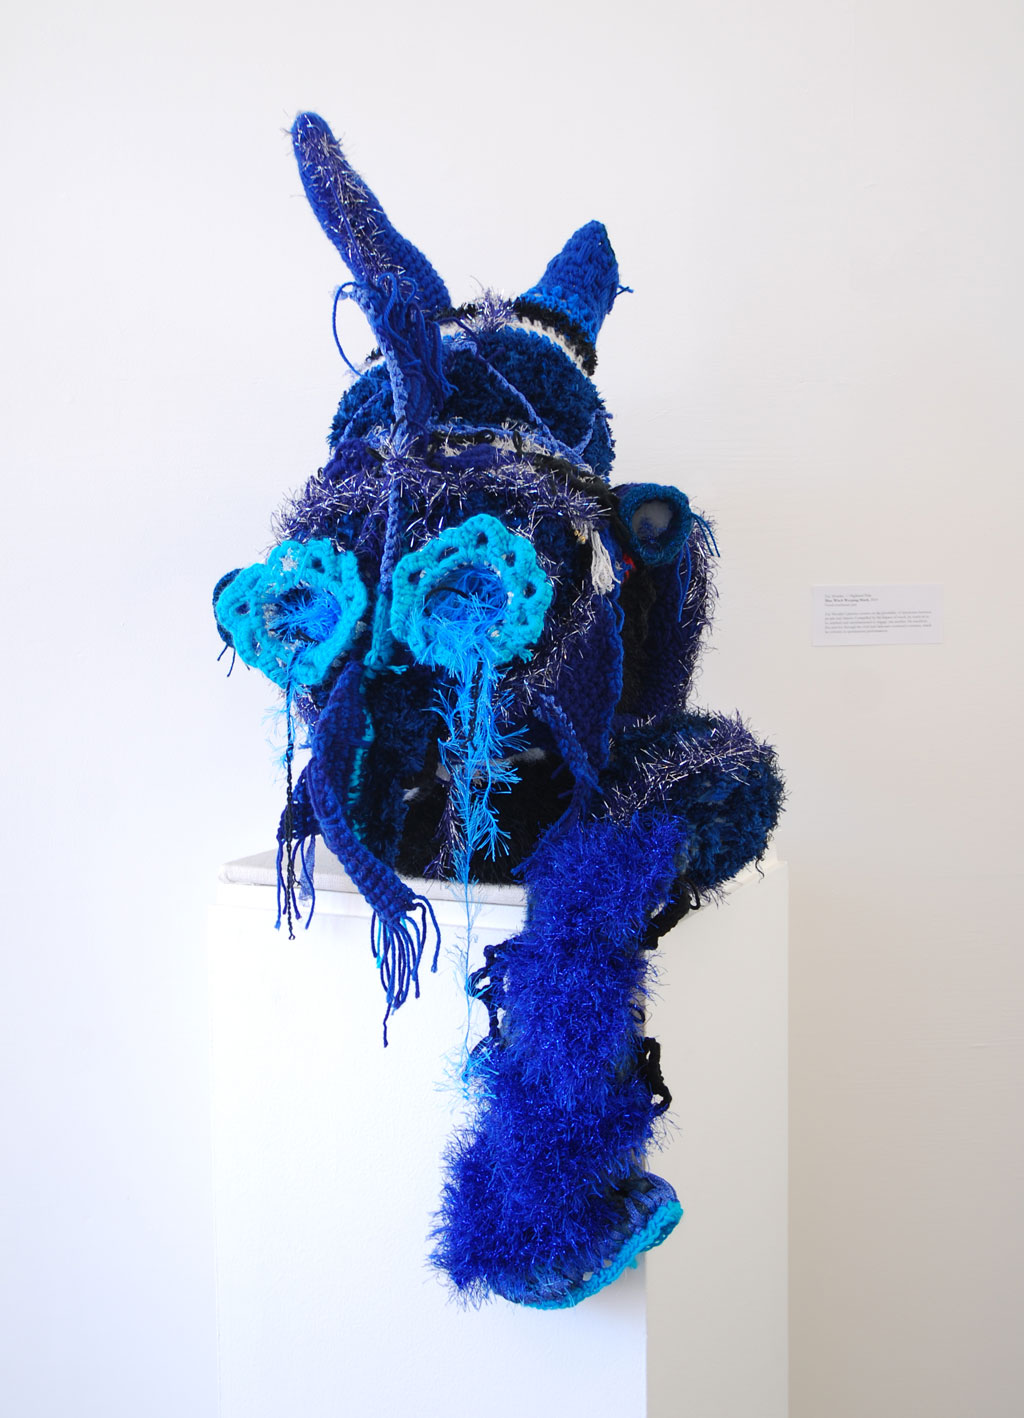 Zac Monday, "Blue Witch Weeping Mask"